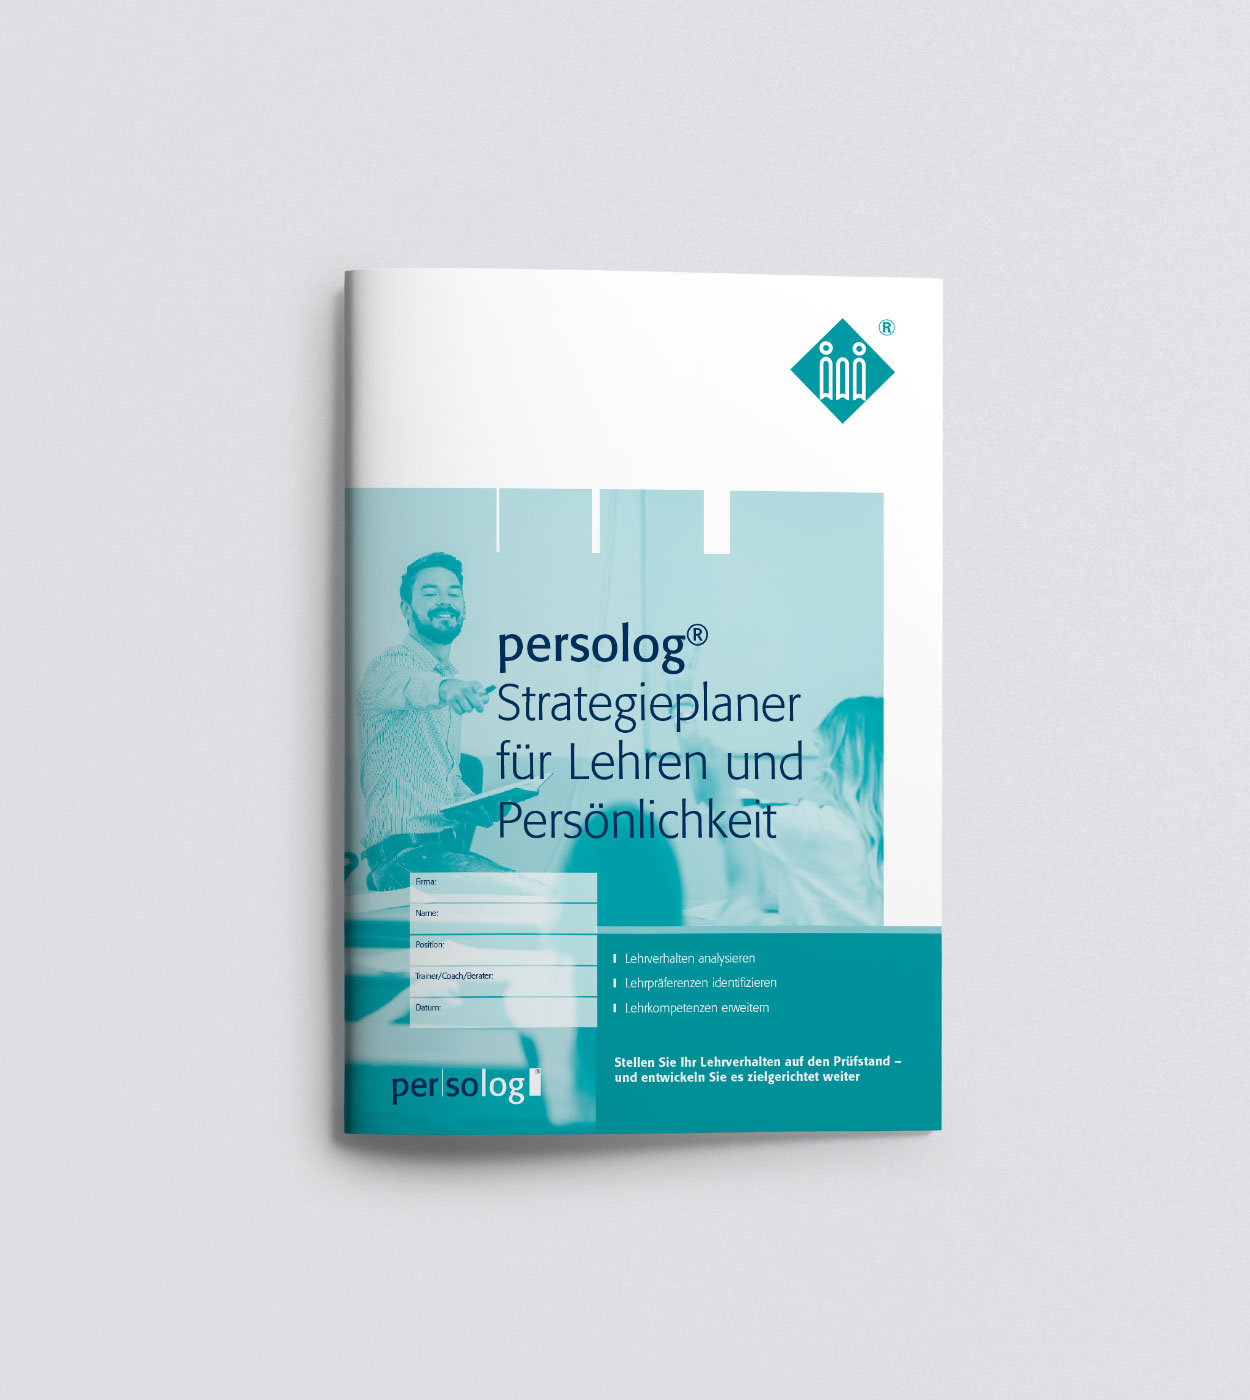 persolog® Strategy Planner for Teching and Personality